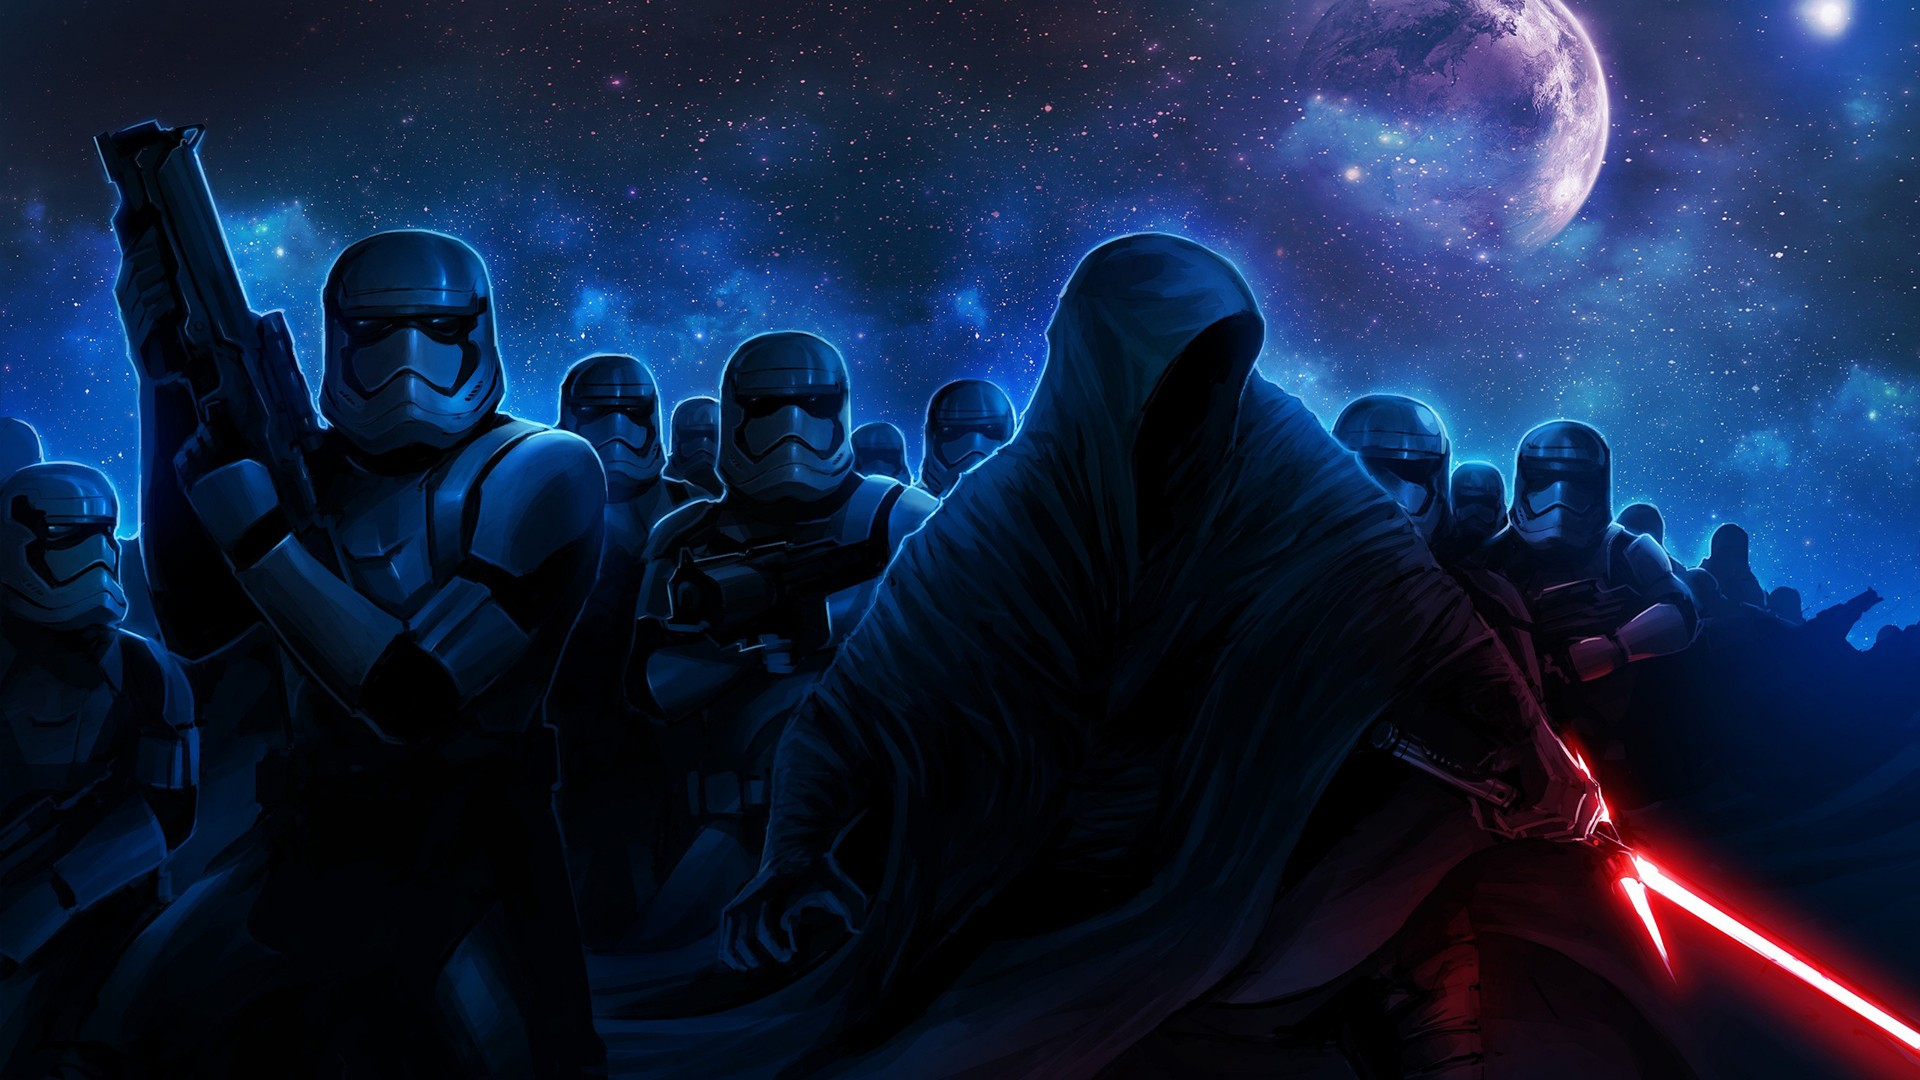 1920x1080 Wallpaper : Star Wars, Storm Troopers, universe, midnight, darkness, screenshot, computer wallpaper, special effects, outer space spooky 101884 HD Wallpapers